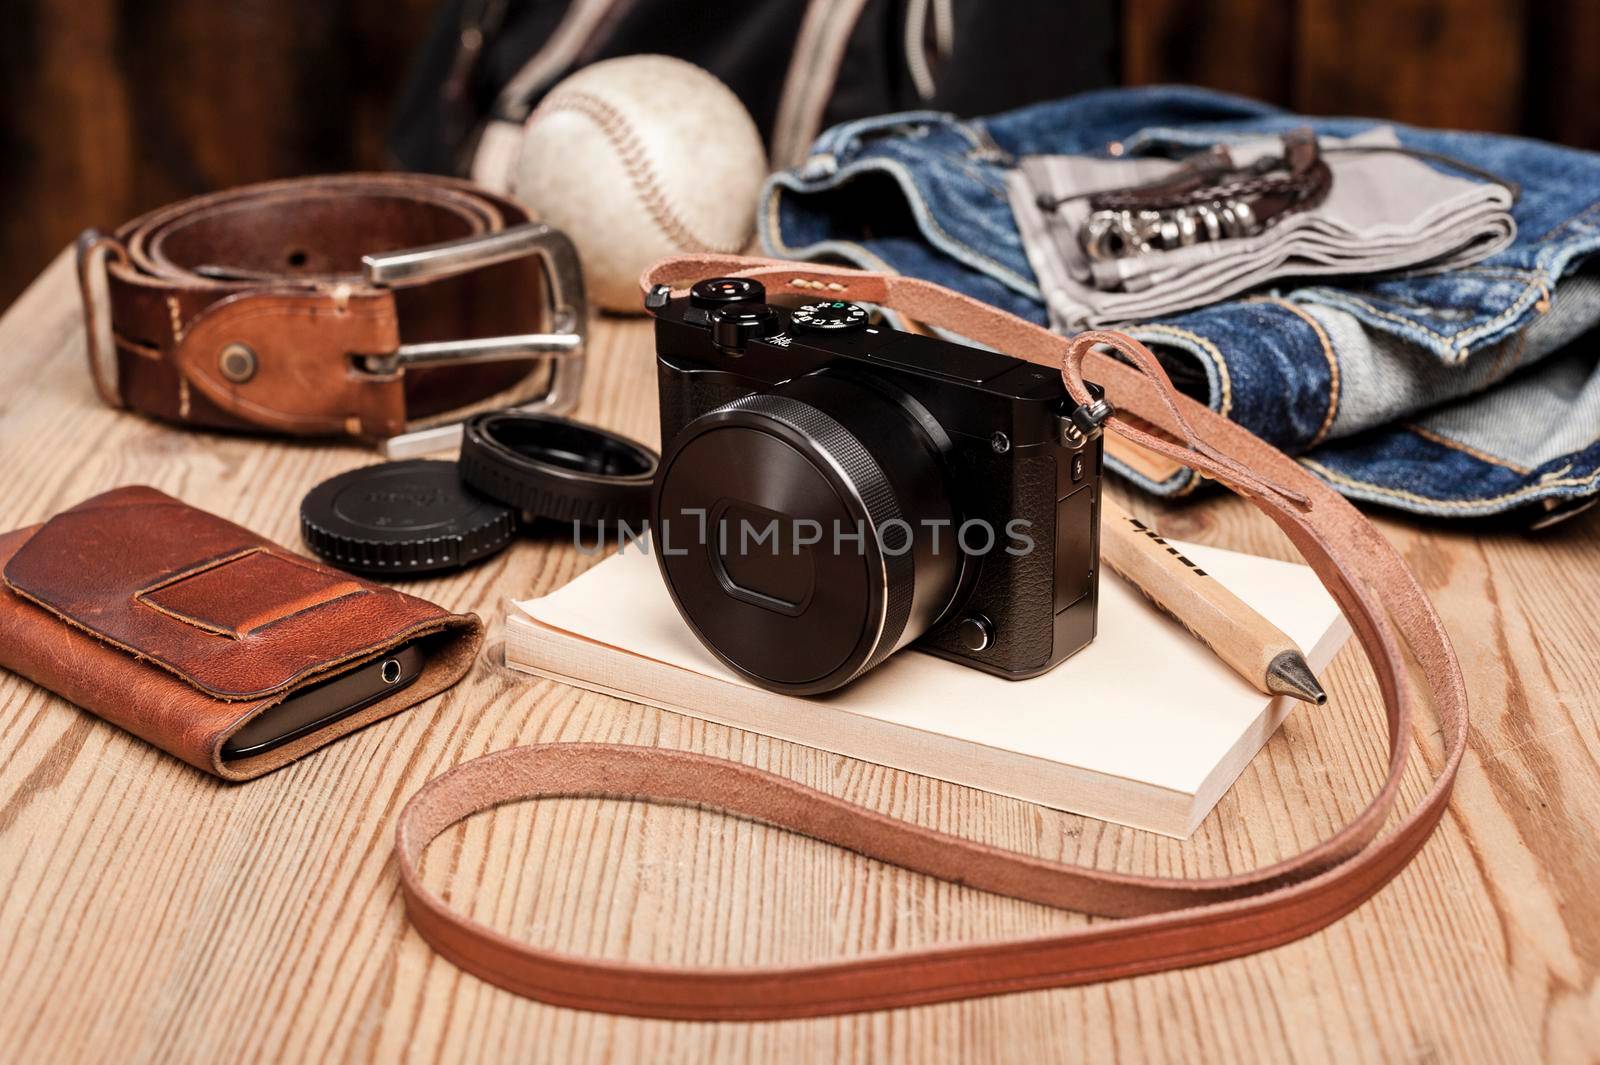 closeup vintage style of digital mirrorless camera with leather strap.